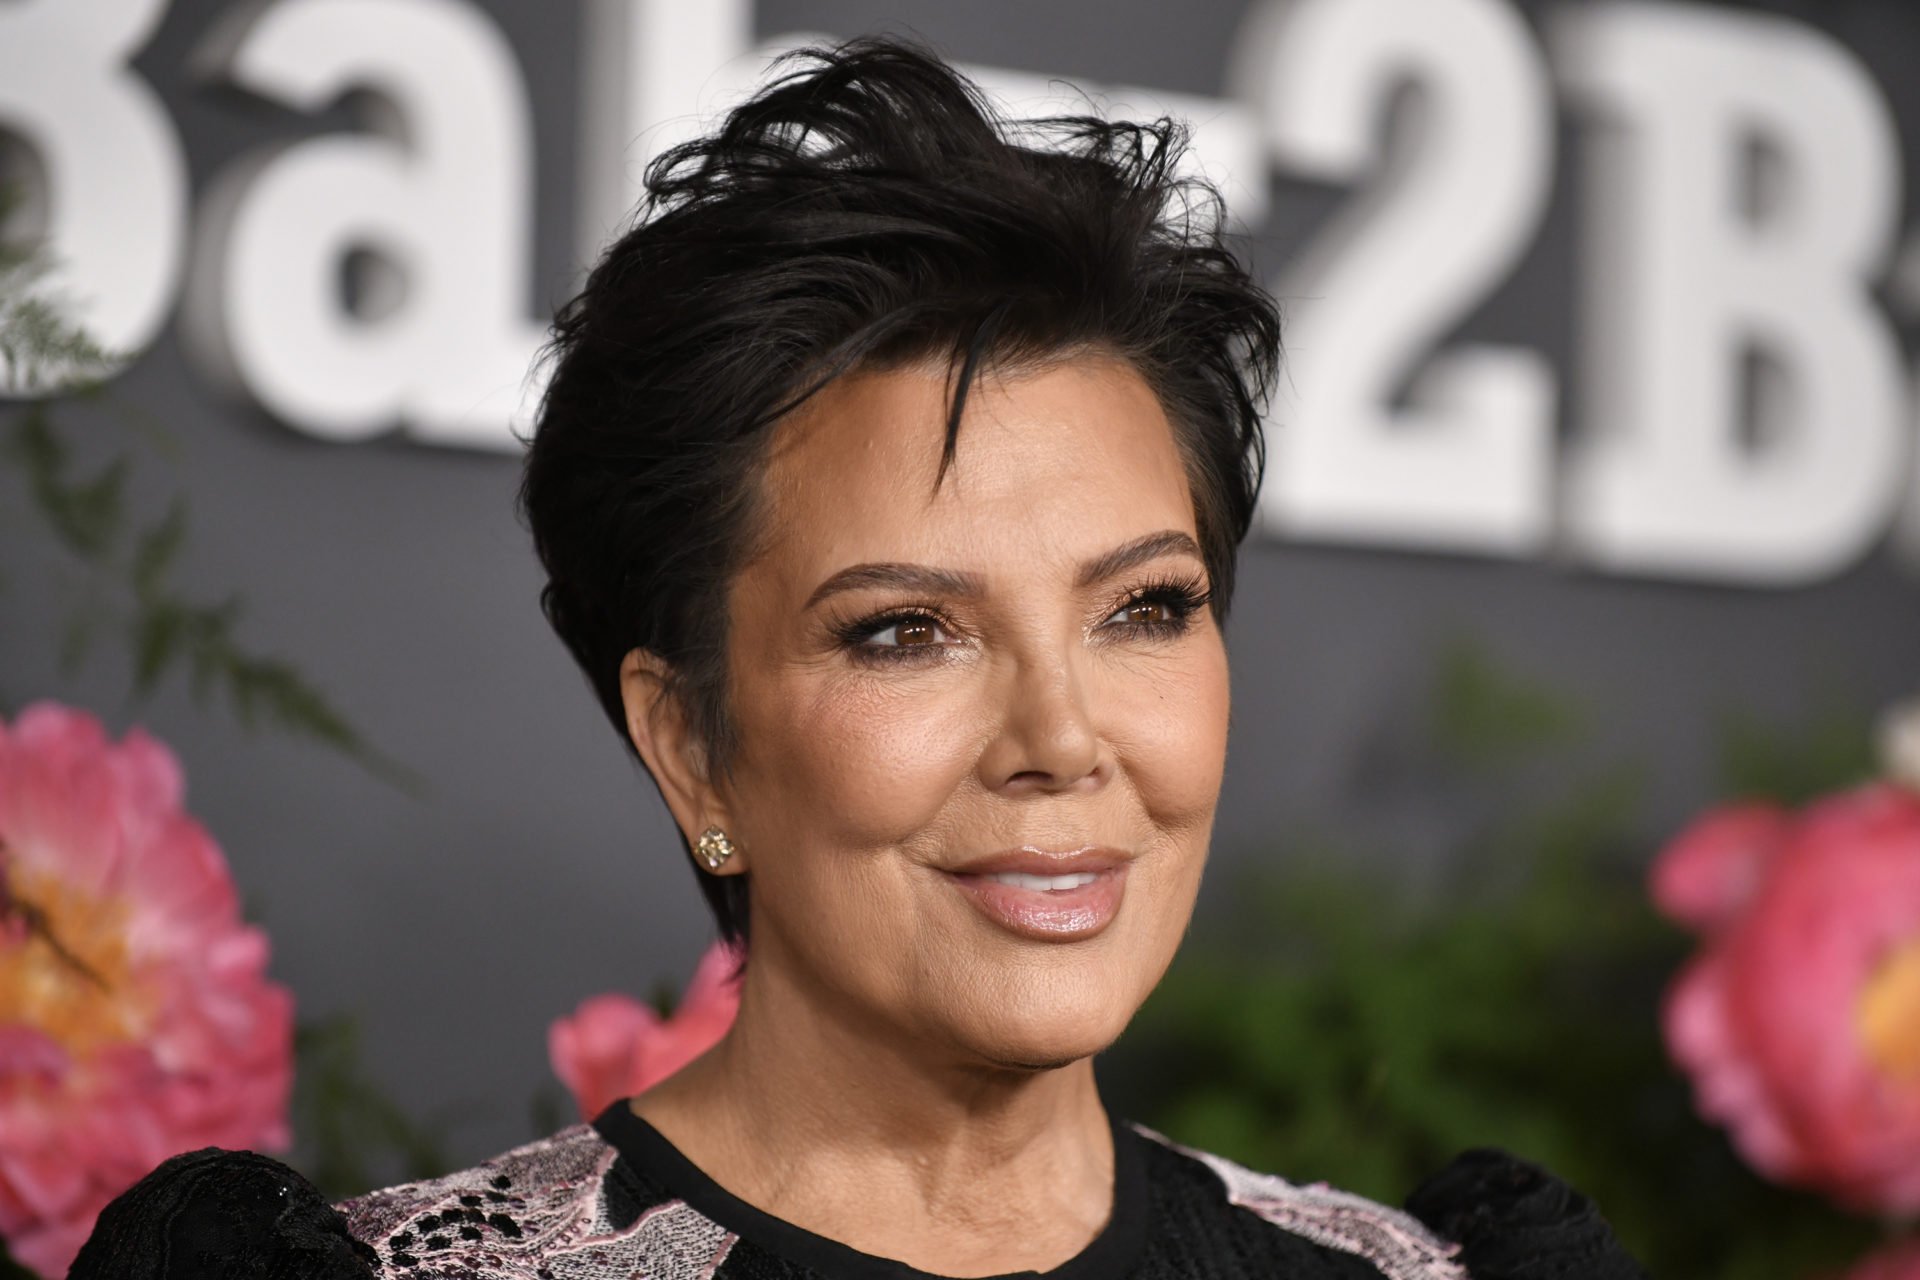 Kris Jenner slammed for 'ridiculous, filtered video' showing off 'flawless' glam